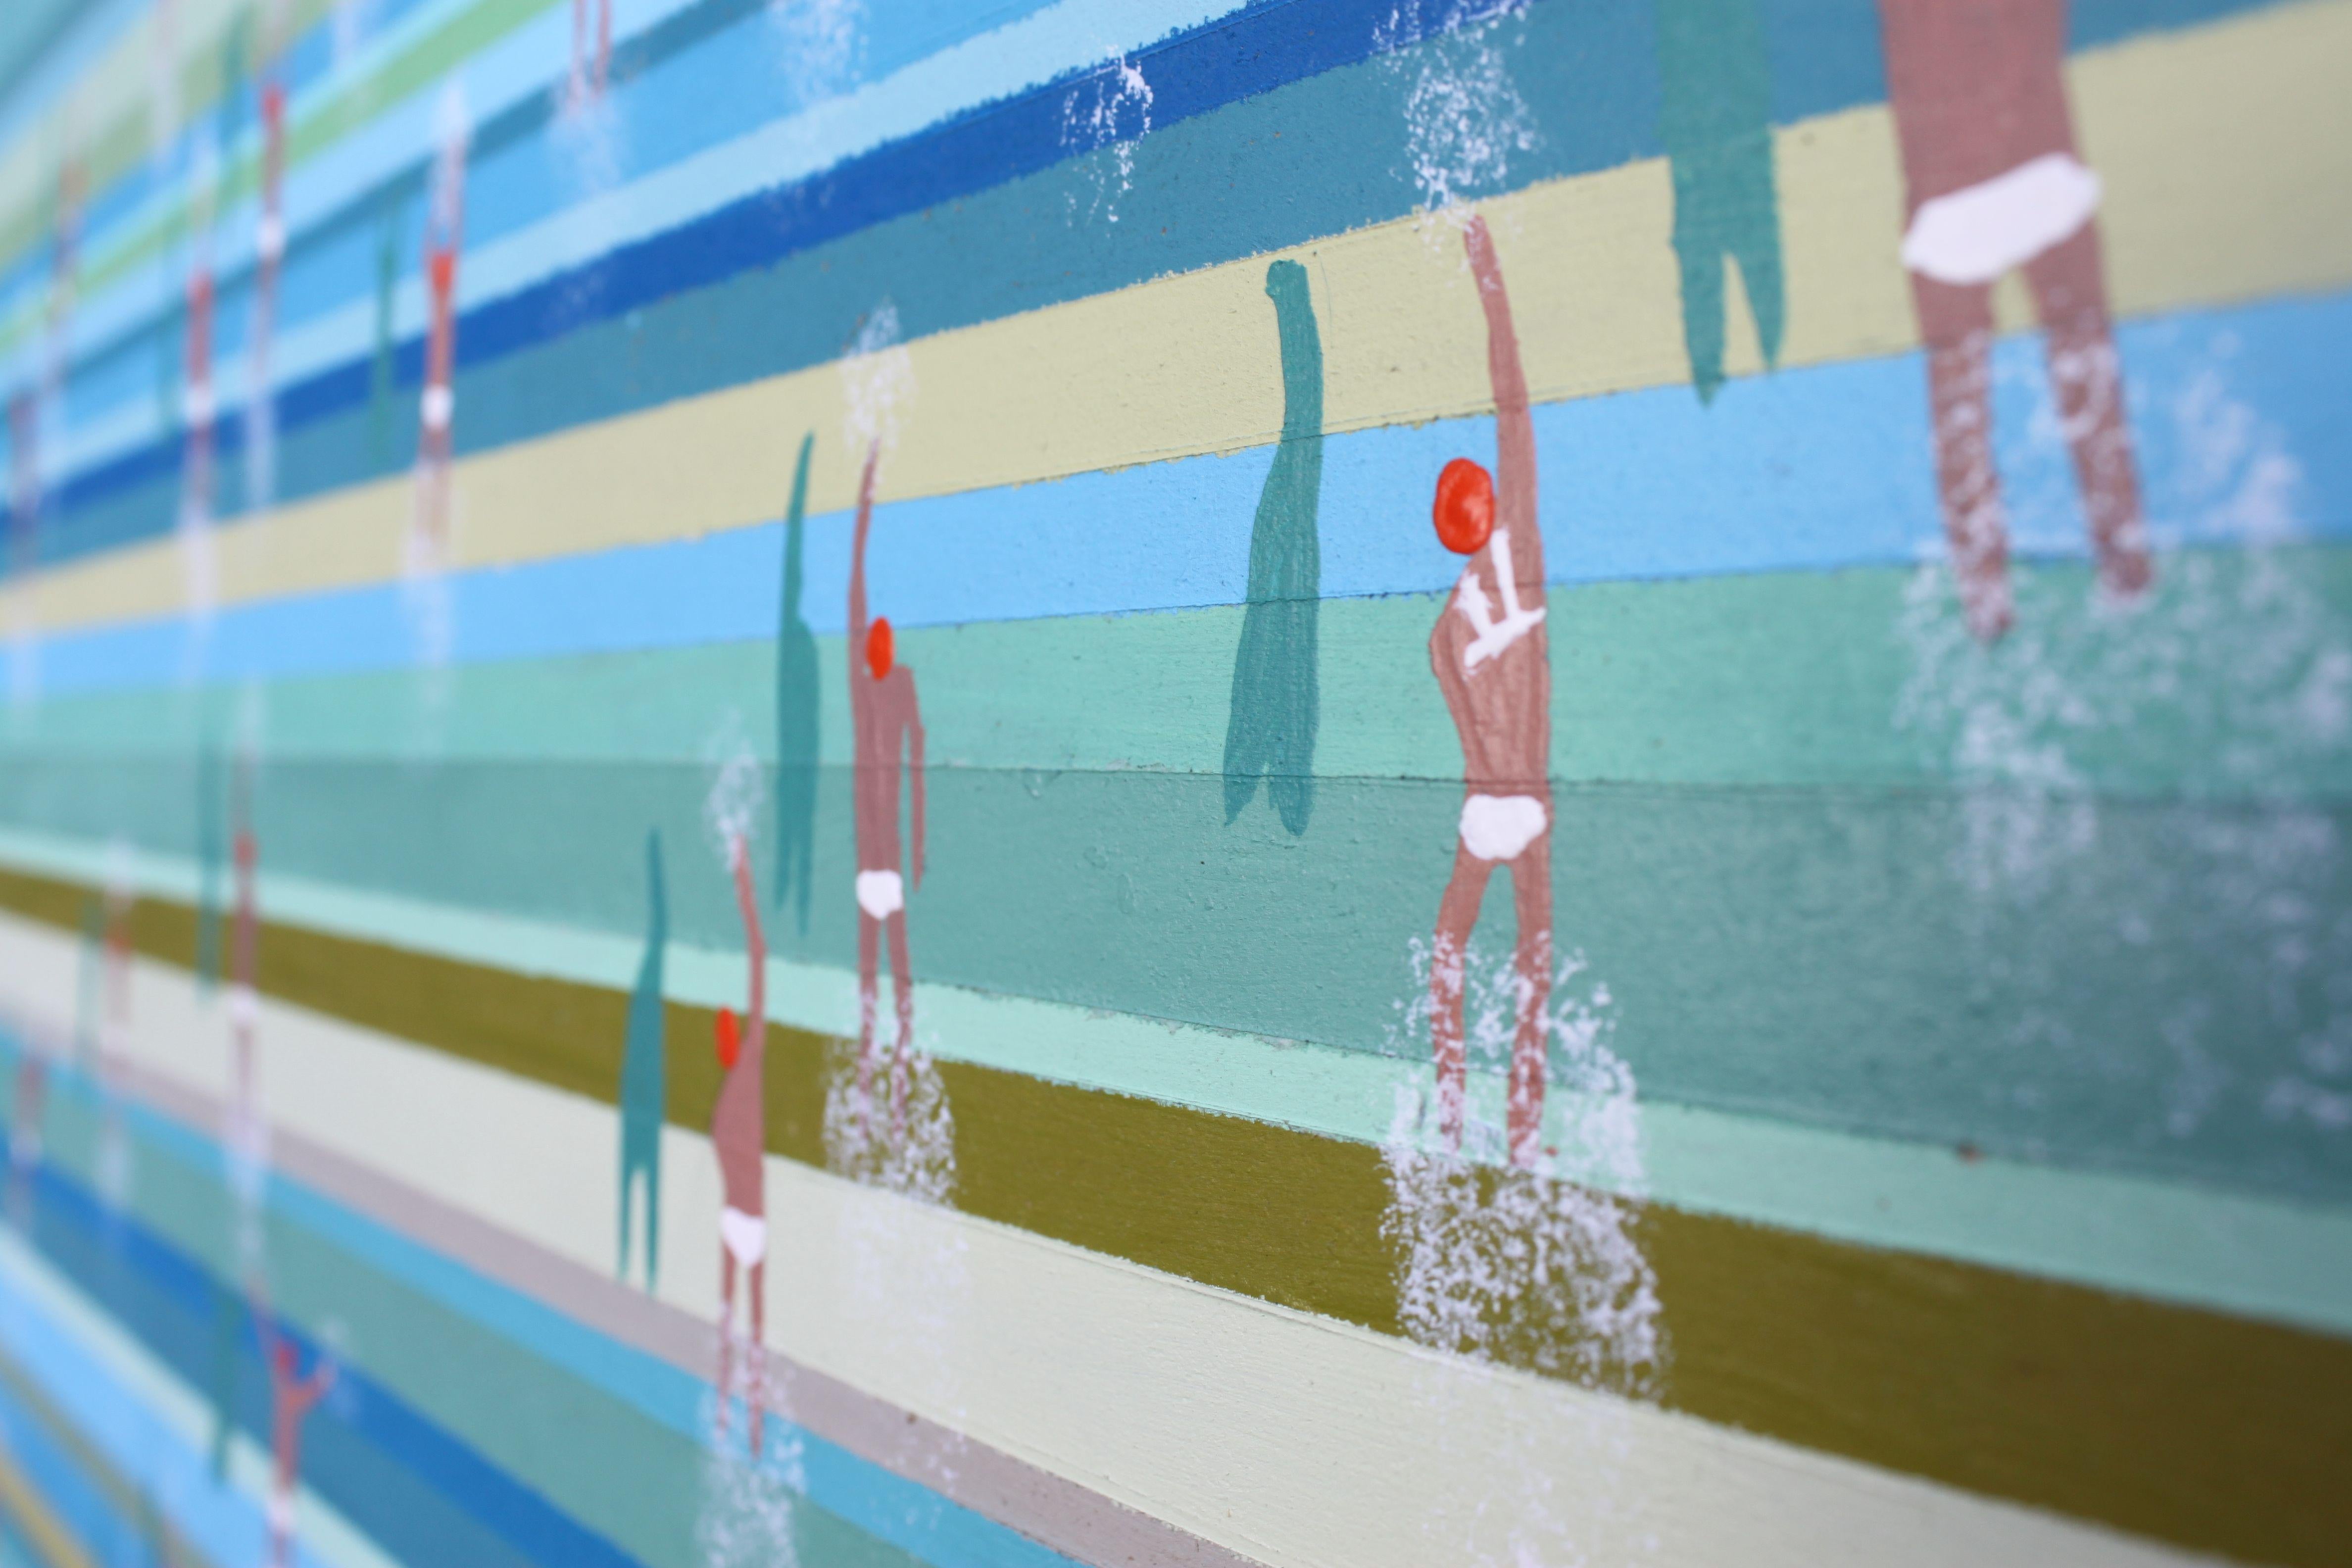 SWIMMERS 011 Â· OPEN WATER SWIMMING START Â· SUN, Painting, Acrylic on MDF Panel 1